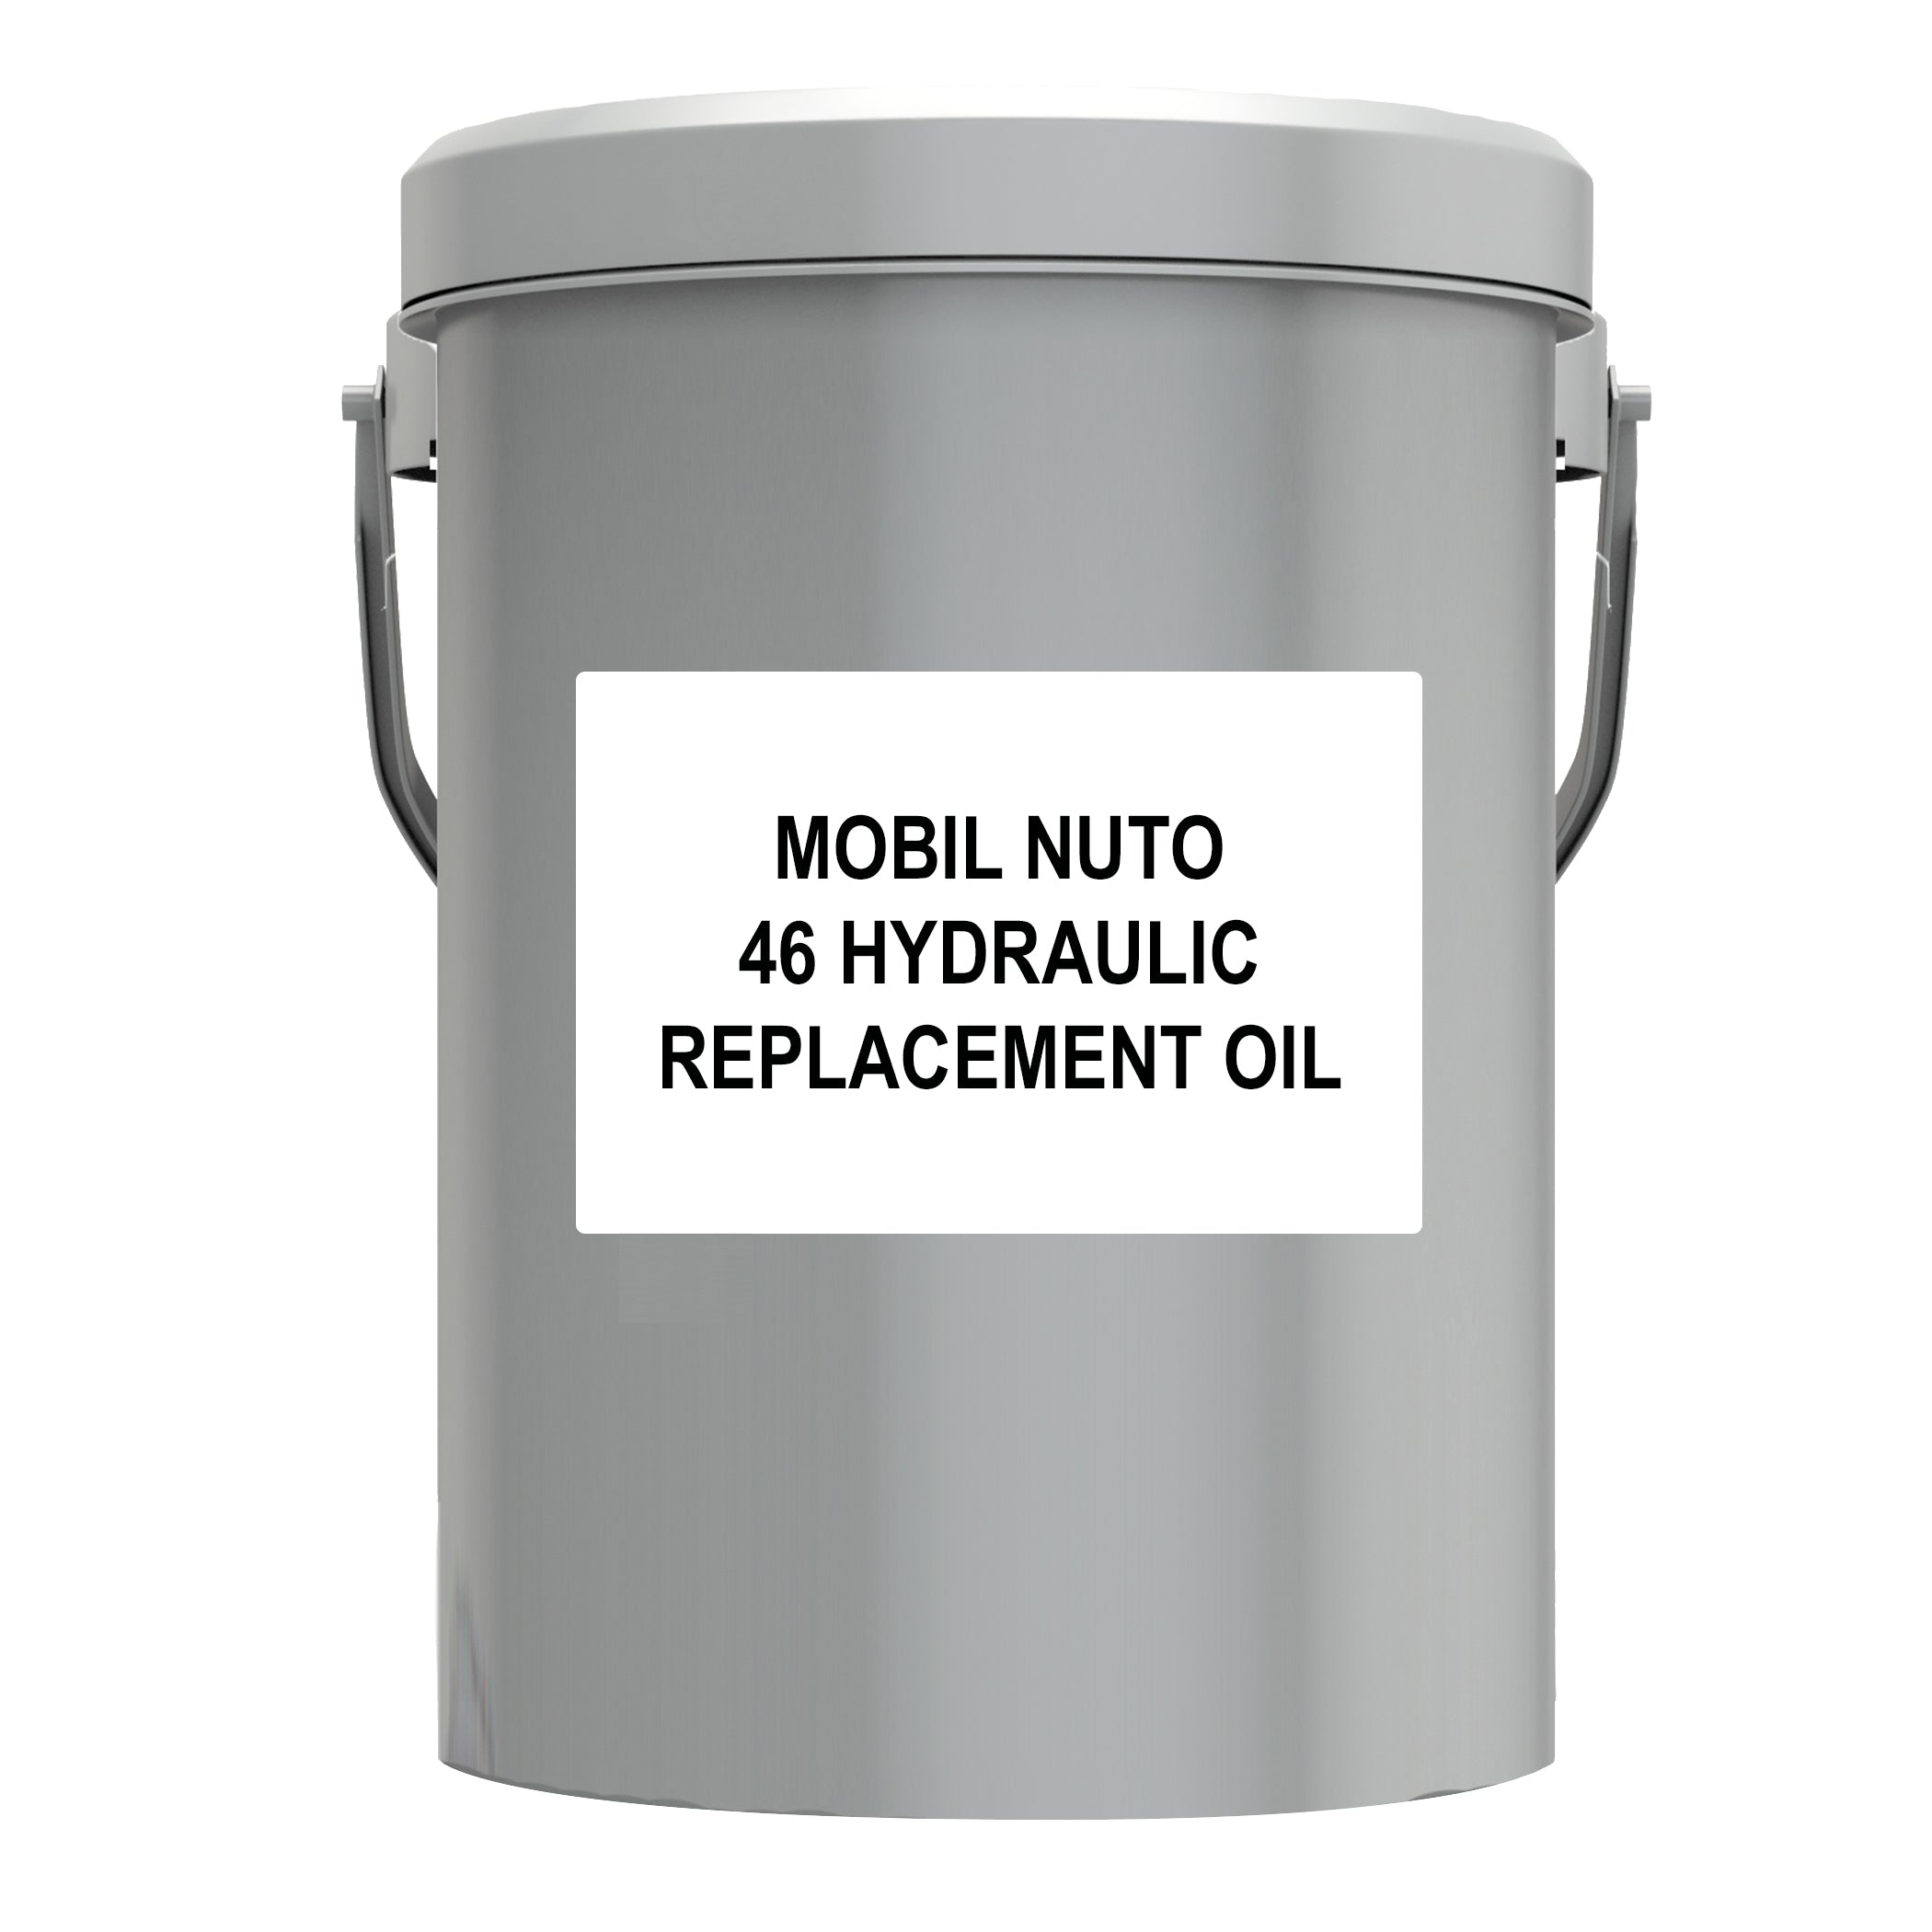 Mobil Nuto H 46 Hydraulic Replacement Oil by RDT - 5 Gallon Pail